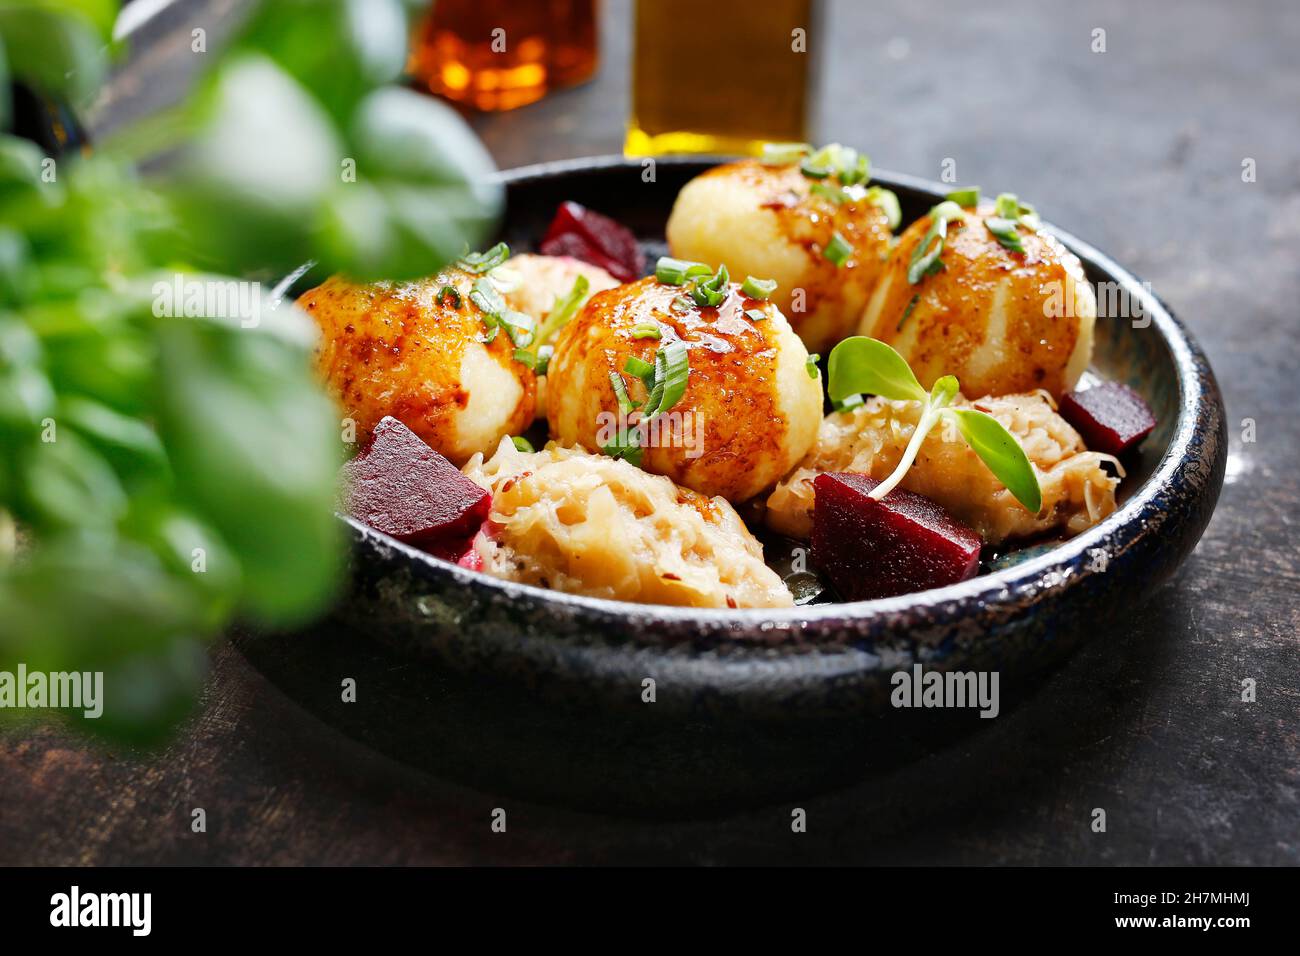 Dumplings with meat and sauce served with boiled cabbage and beetroot. A tasty dish.Culinary photography. Suggestion to serve the dish. Stock Photo